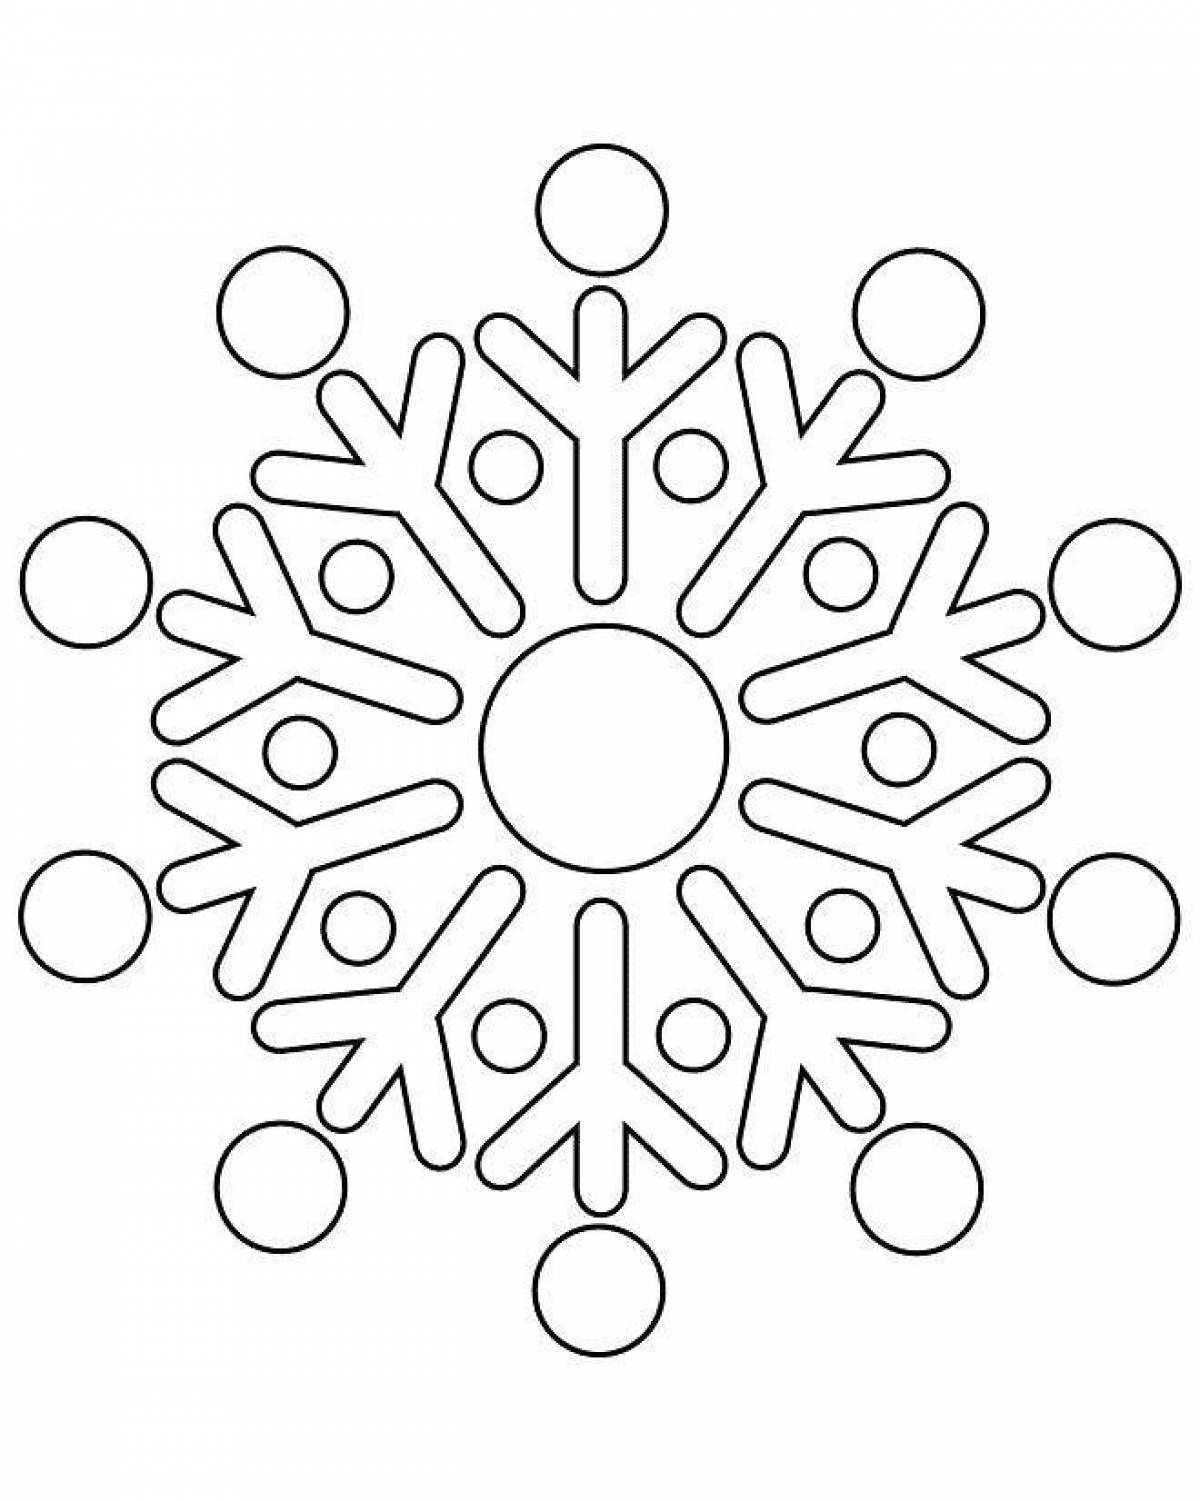 Fun coloring book of snowflakes for children 4-5 years old